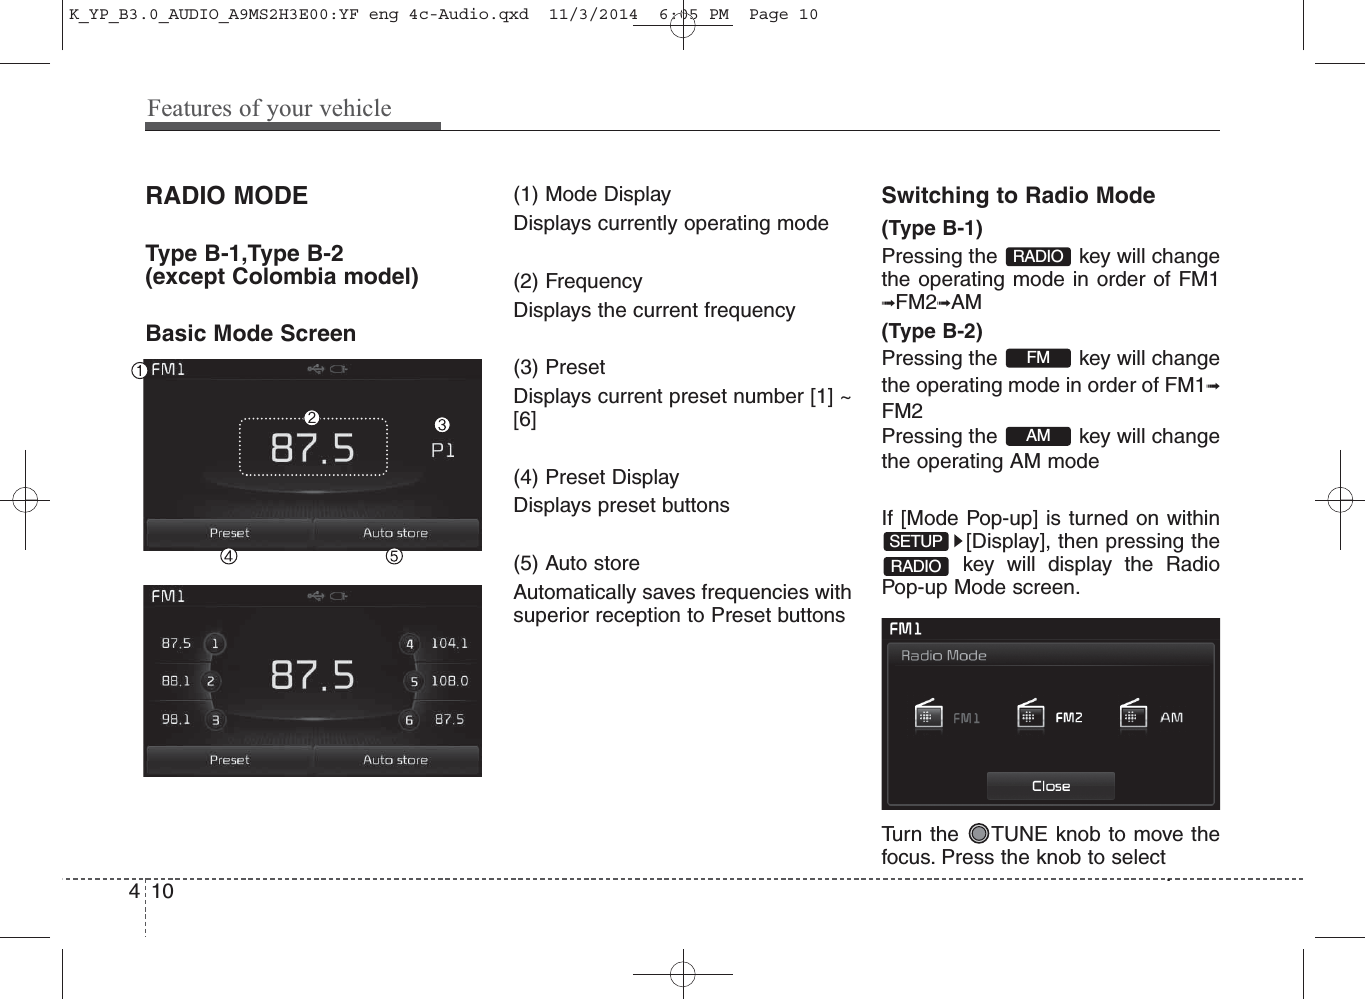 RADIO MODE Type B-1,Type B-2(except Colombia model)Basic Mode Screen(1) Mode DisplayDisplays currently operating mode(2) FrequencyDisplays the current frequency(3) PresetDisplays current preset number [1] ~[6](4) Preset DisplayDisplays preset buttons(5) Auto storeAutomatically saves frequencies withsuperior reception to Preset buttonsSwitching to Radio Mode(Type B-1)Pressing the  key will changethe operating mode in order of FM1➟FM2➟AM(Type B-2)Pressing the  key will changethe operating mode in order of FM1➟FM2Pressing the  key will changethe operating AM mode If [Mode Pop-up] is turned on within[Display], then pressing thekey will display the RadioPop-up Mode screen.Turn the  TUNE knob to move thefocus. Press the knob to select.AMFMSETUPRADIORADIO410Features of your vehicleK_YP_B3.0_AUDIO_A9MS2H3E00:YF eng 4c-Audio.qxd  11/3/2014  6:05 PM  Page 10